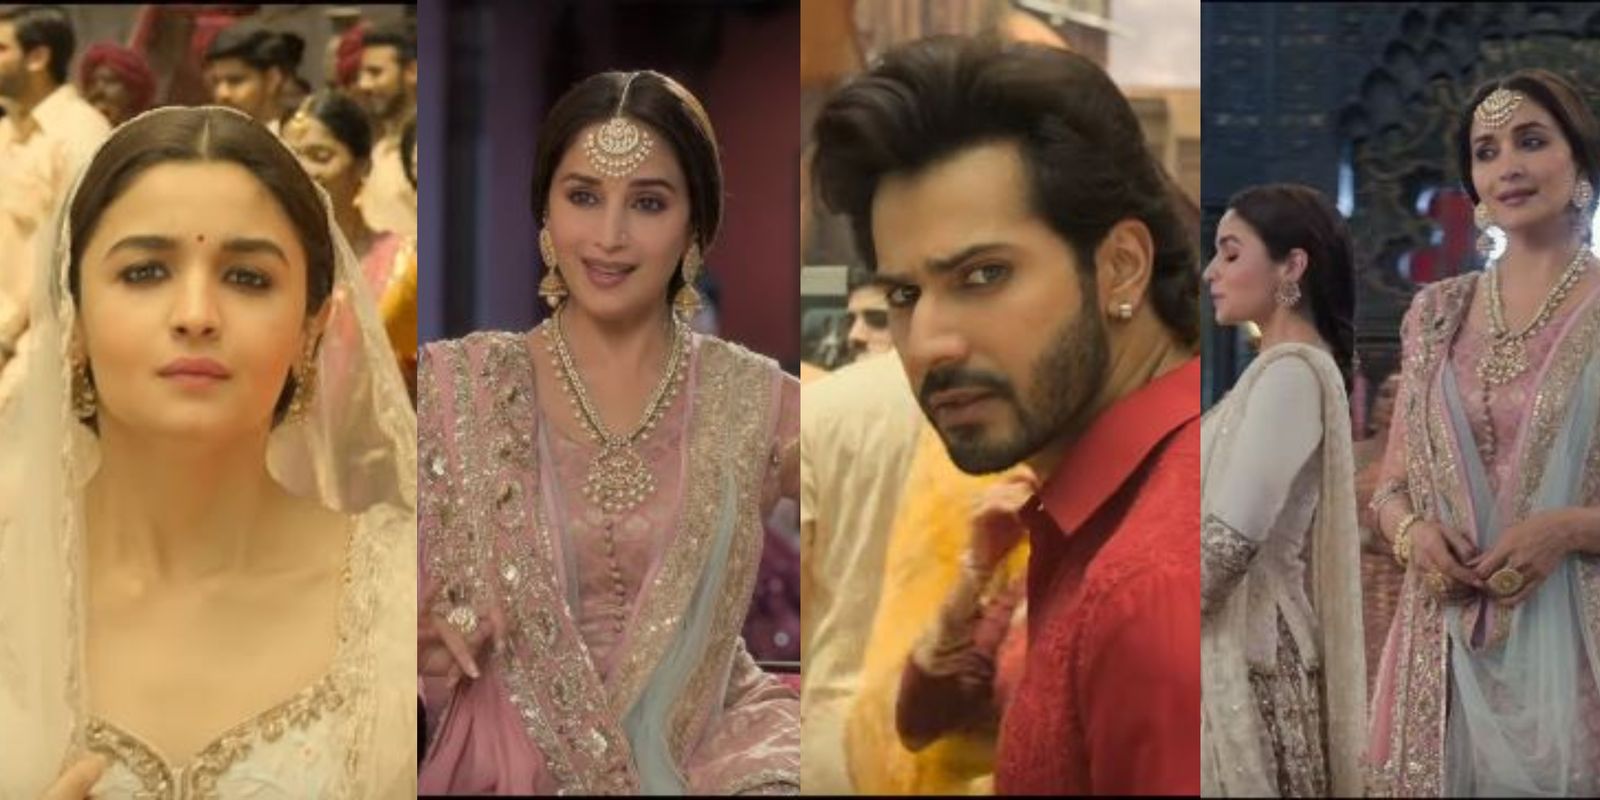 Kalank's Ghar More Pardesiya Song Is A Visual Treat- Thanks To The Sets And Alia's Captivating Dance!